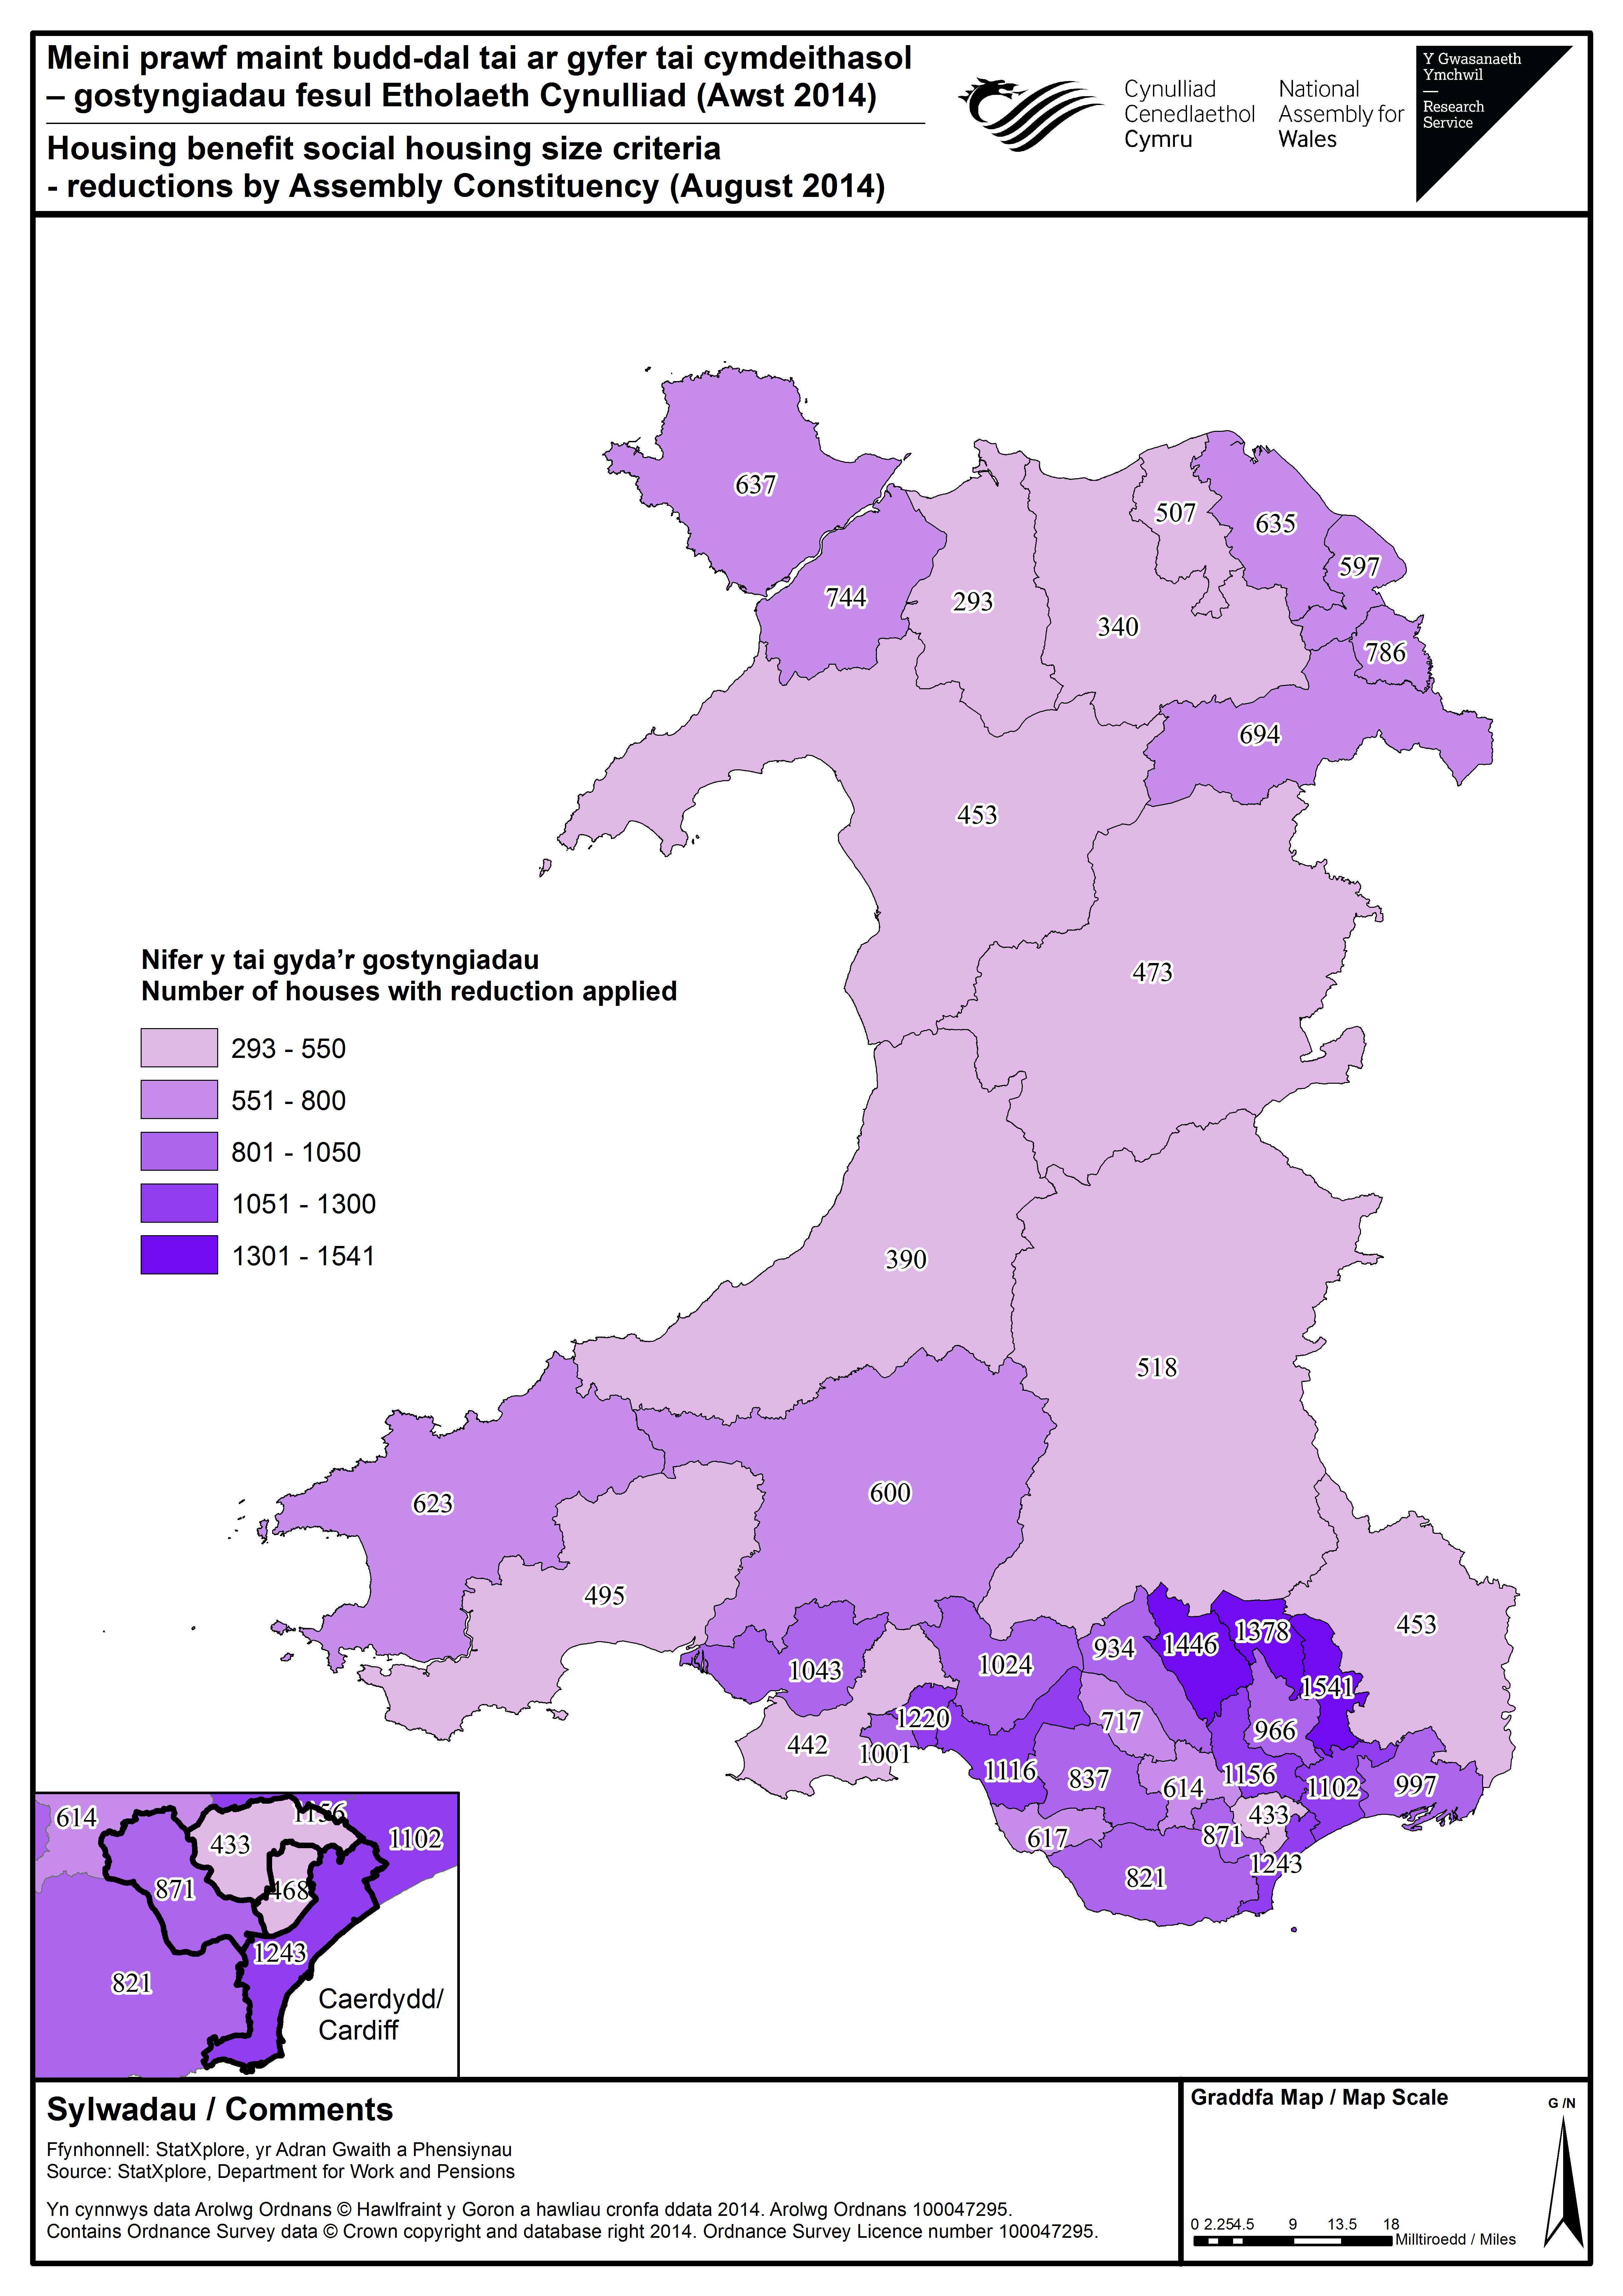 RS143077 Constituencies affected by the Housing Benefit social housing size criteria